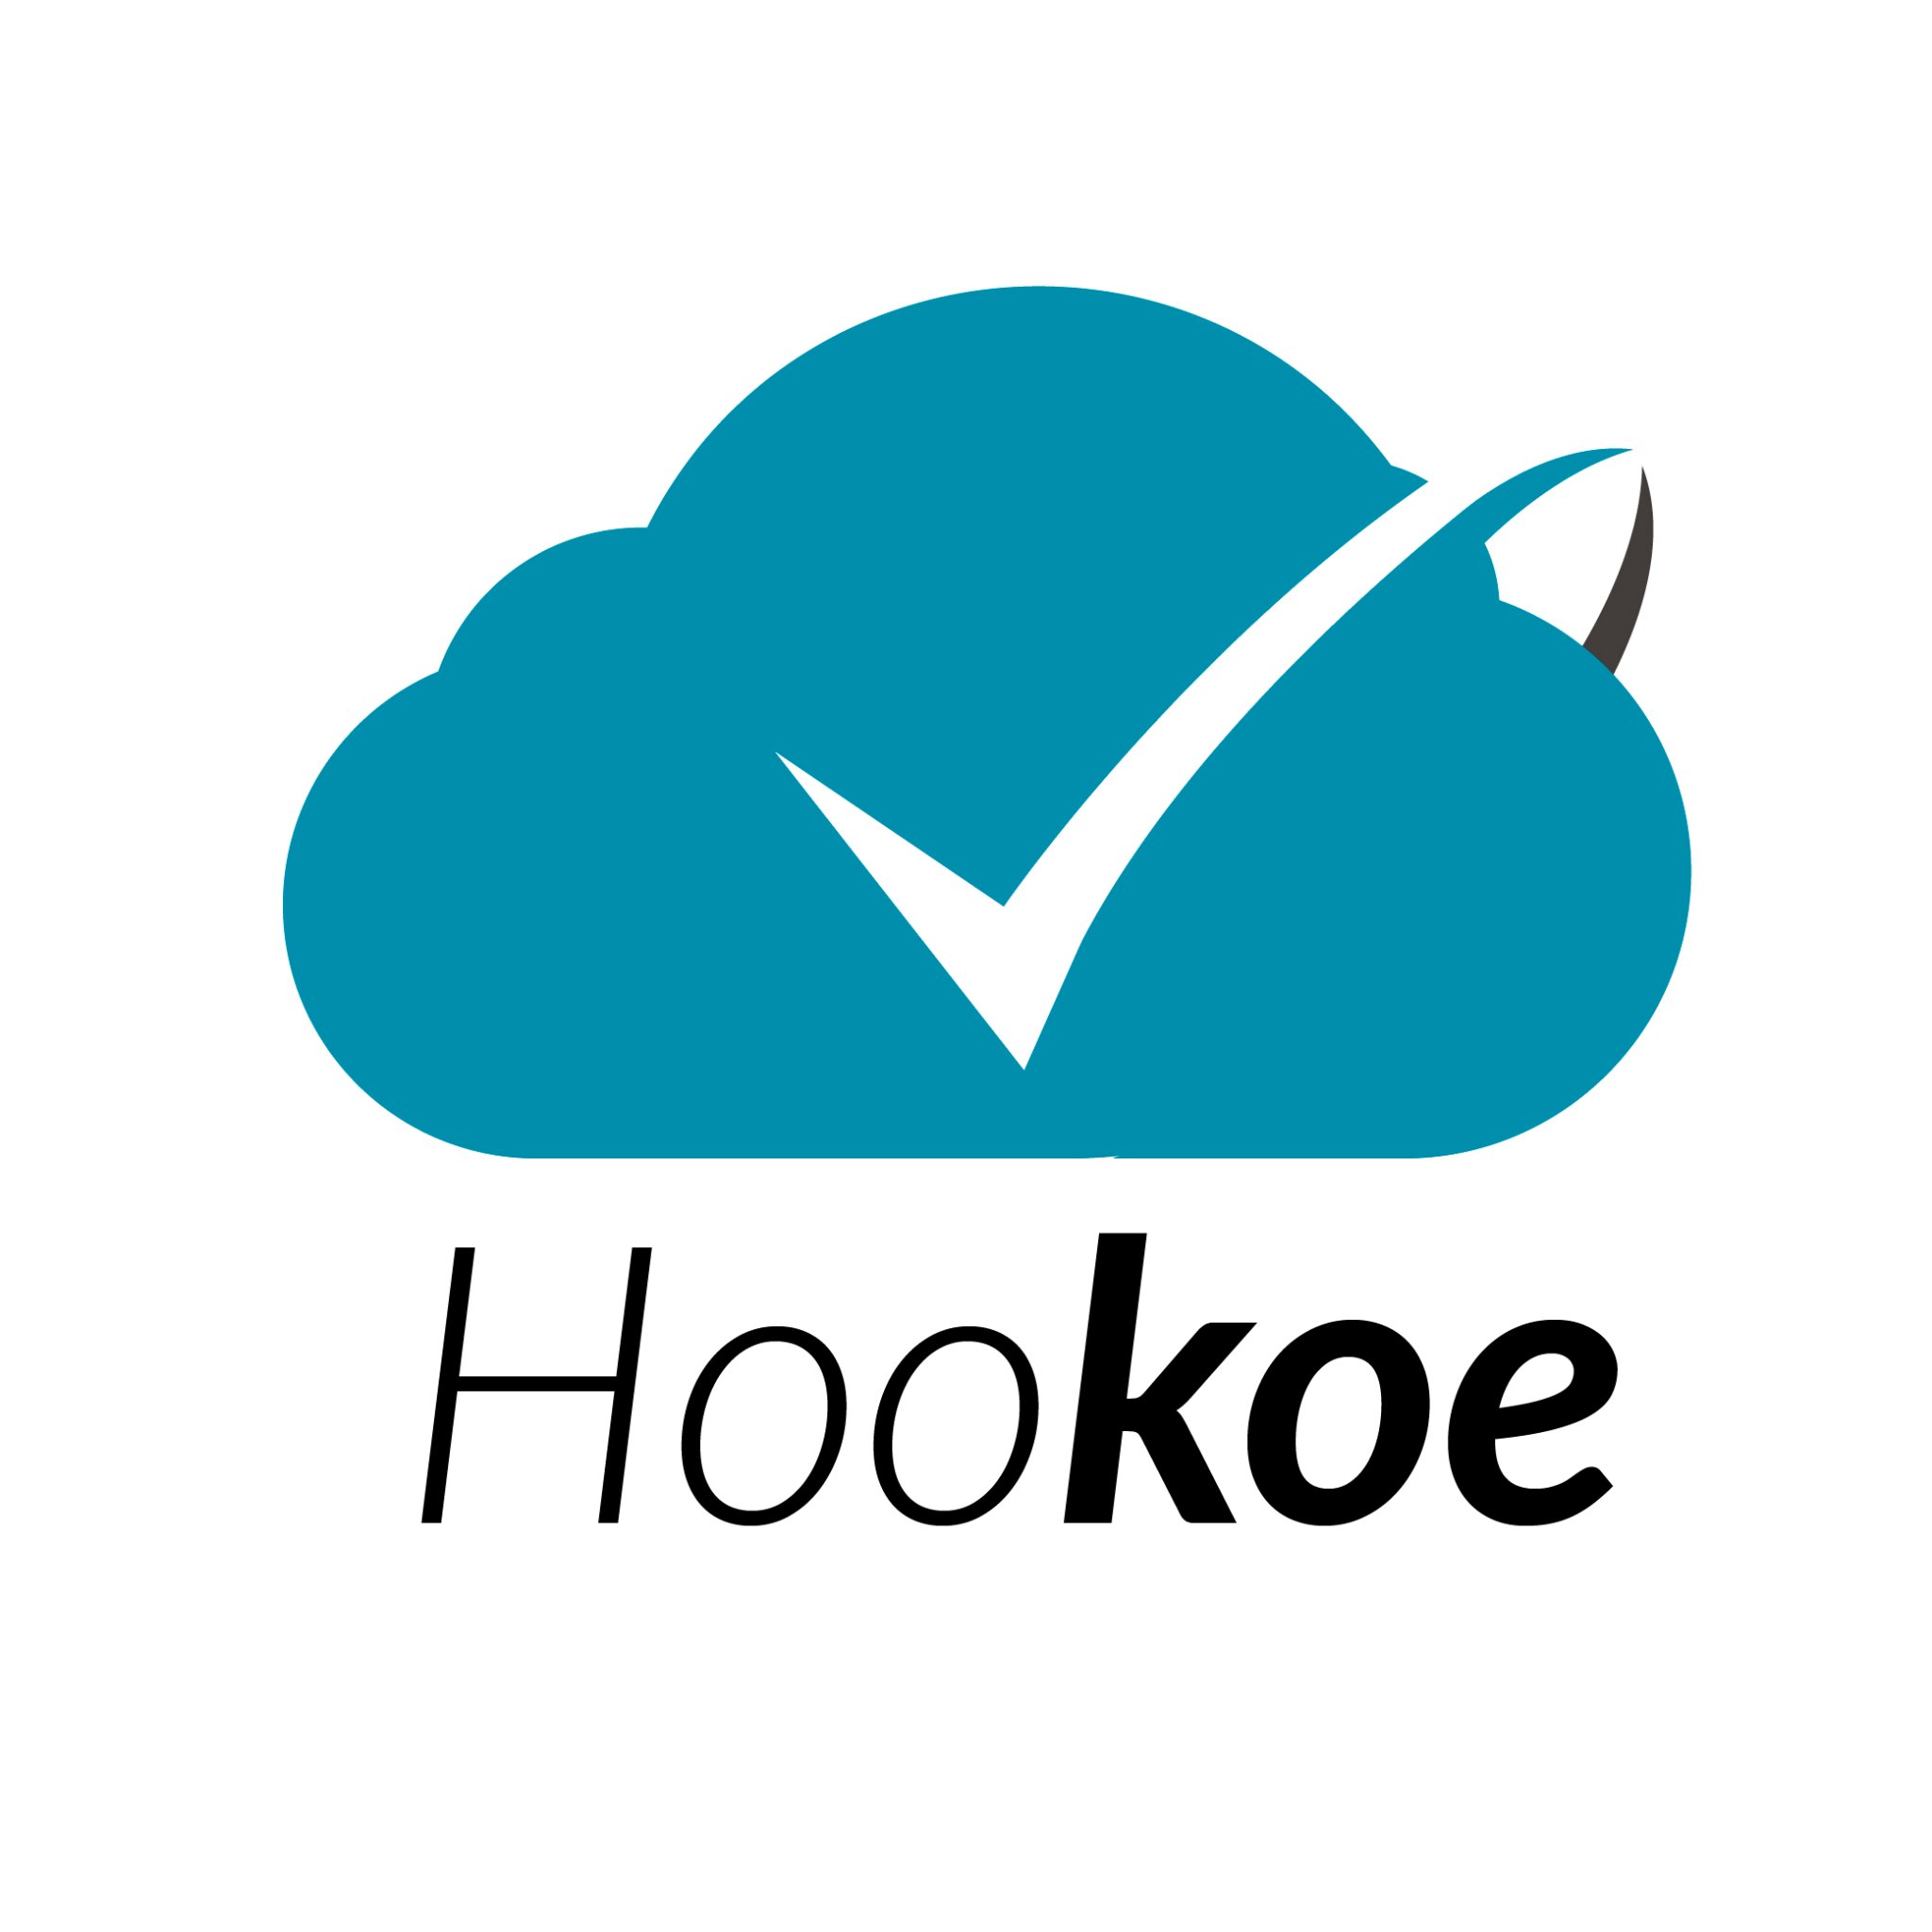 Hookoe powers the real-time management of appointment scheduling and boost competitive edges with its innovative reservation system.